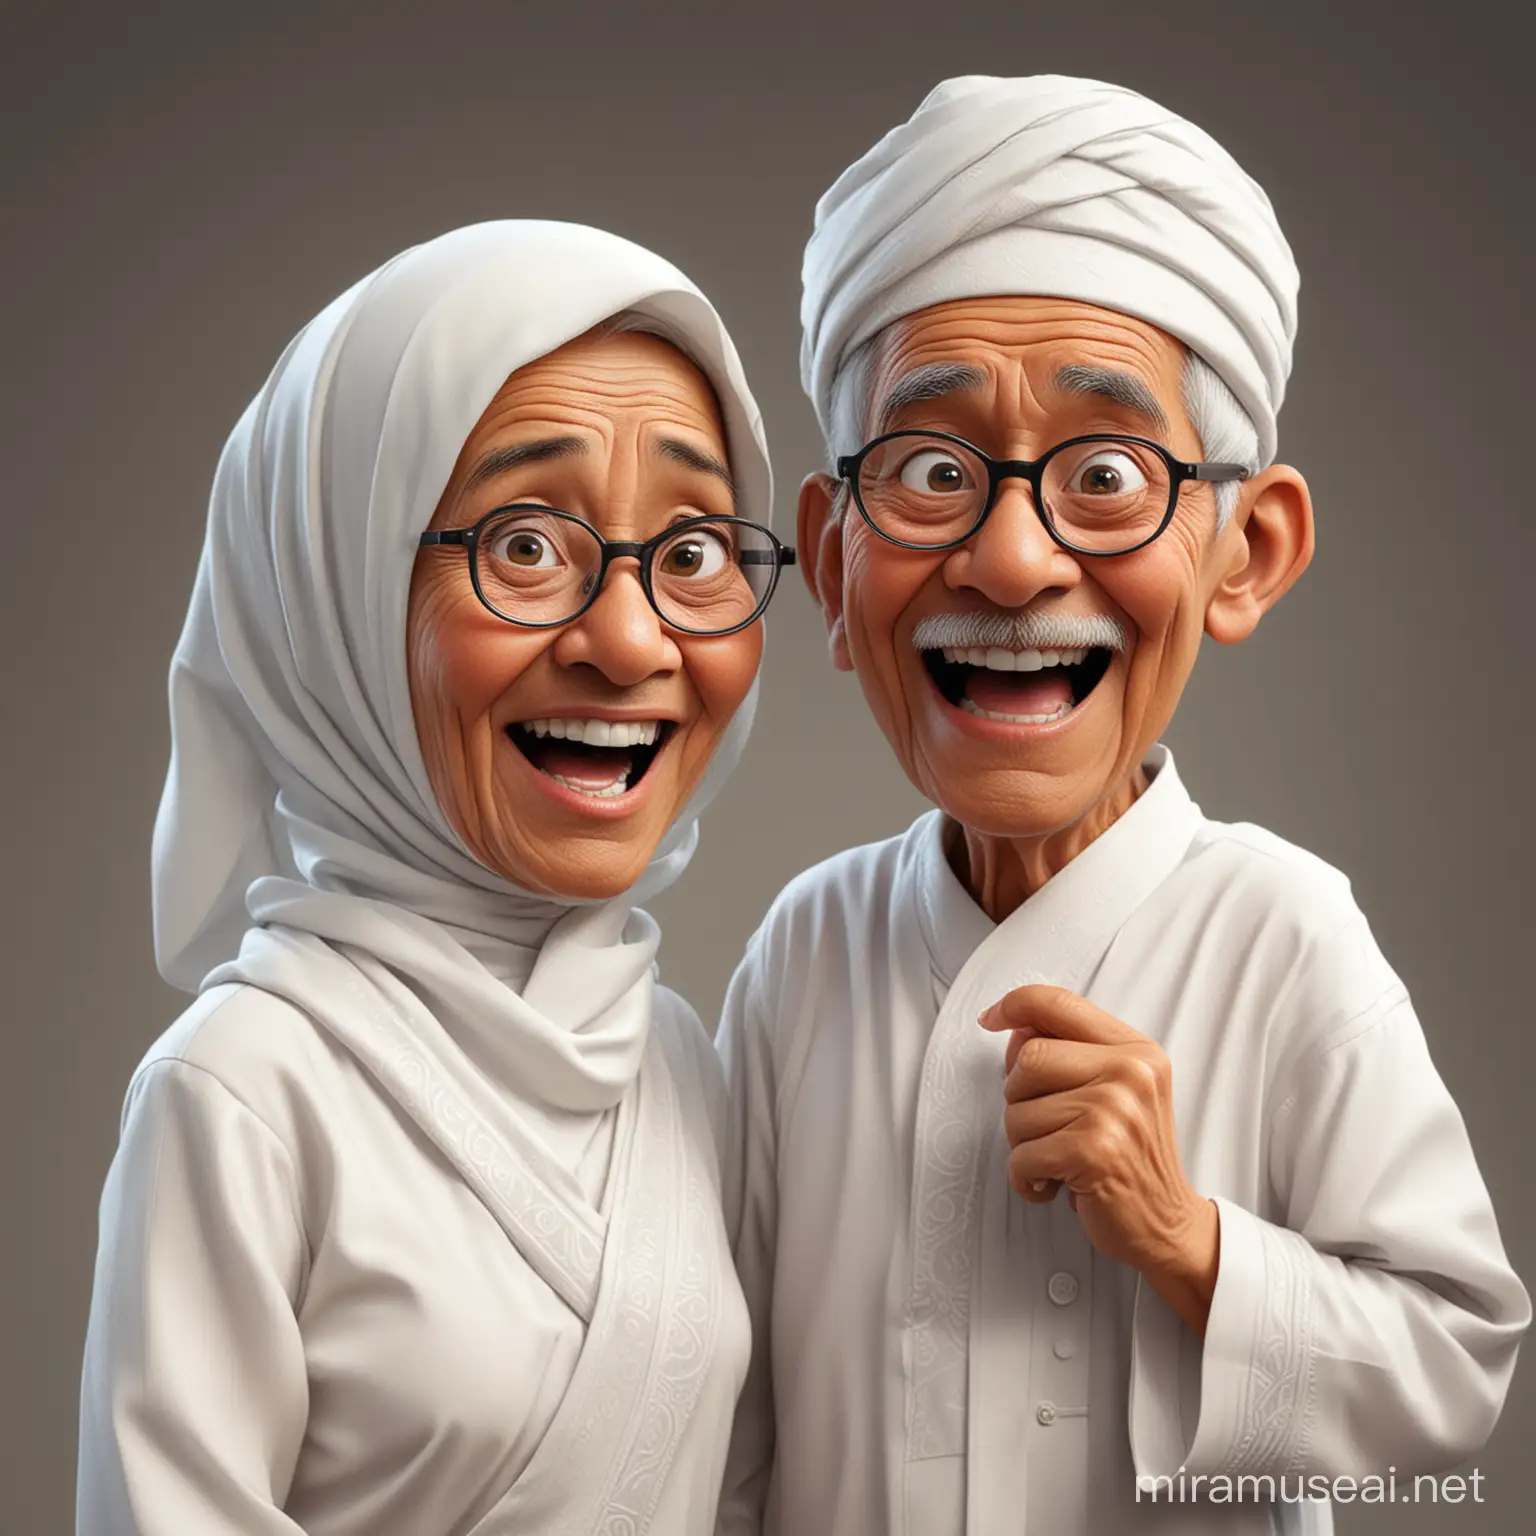 A cartoon caricature of A Couple Indonesian Age 70's, wearing white moslem cloth and making funny faces in the style of Pixar.


